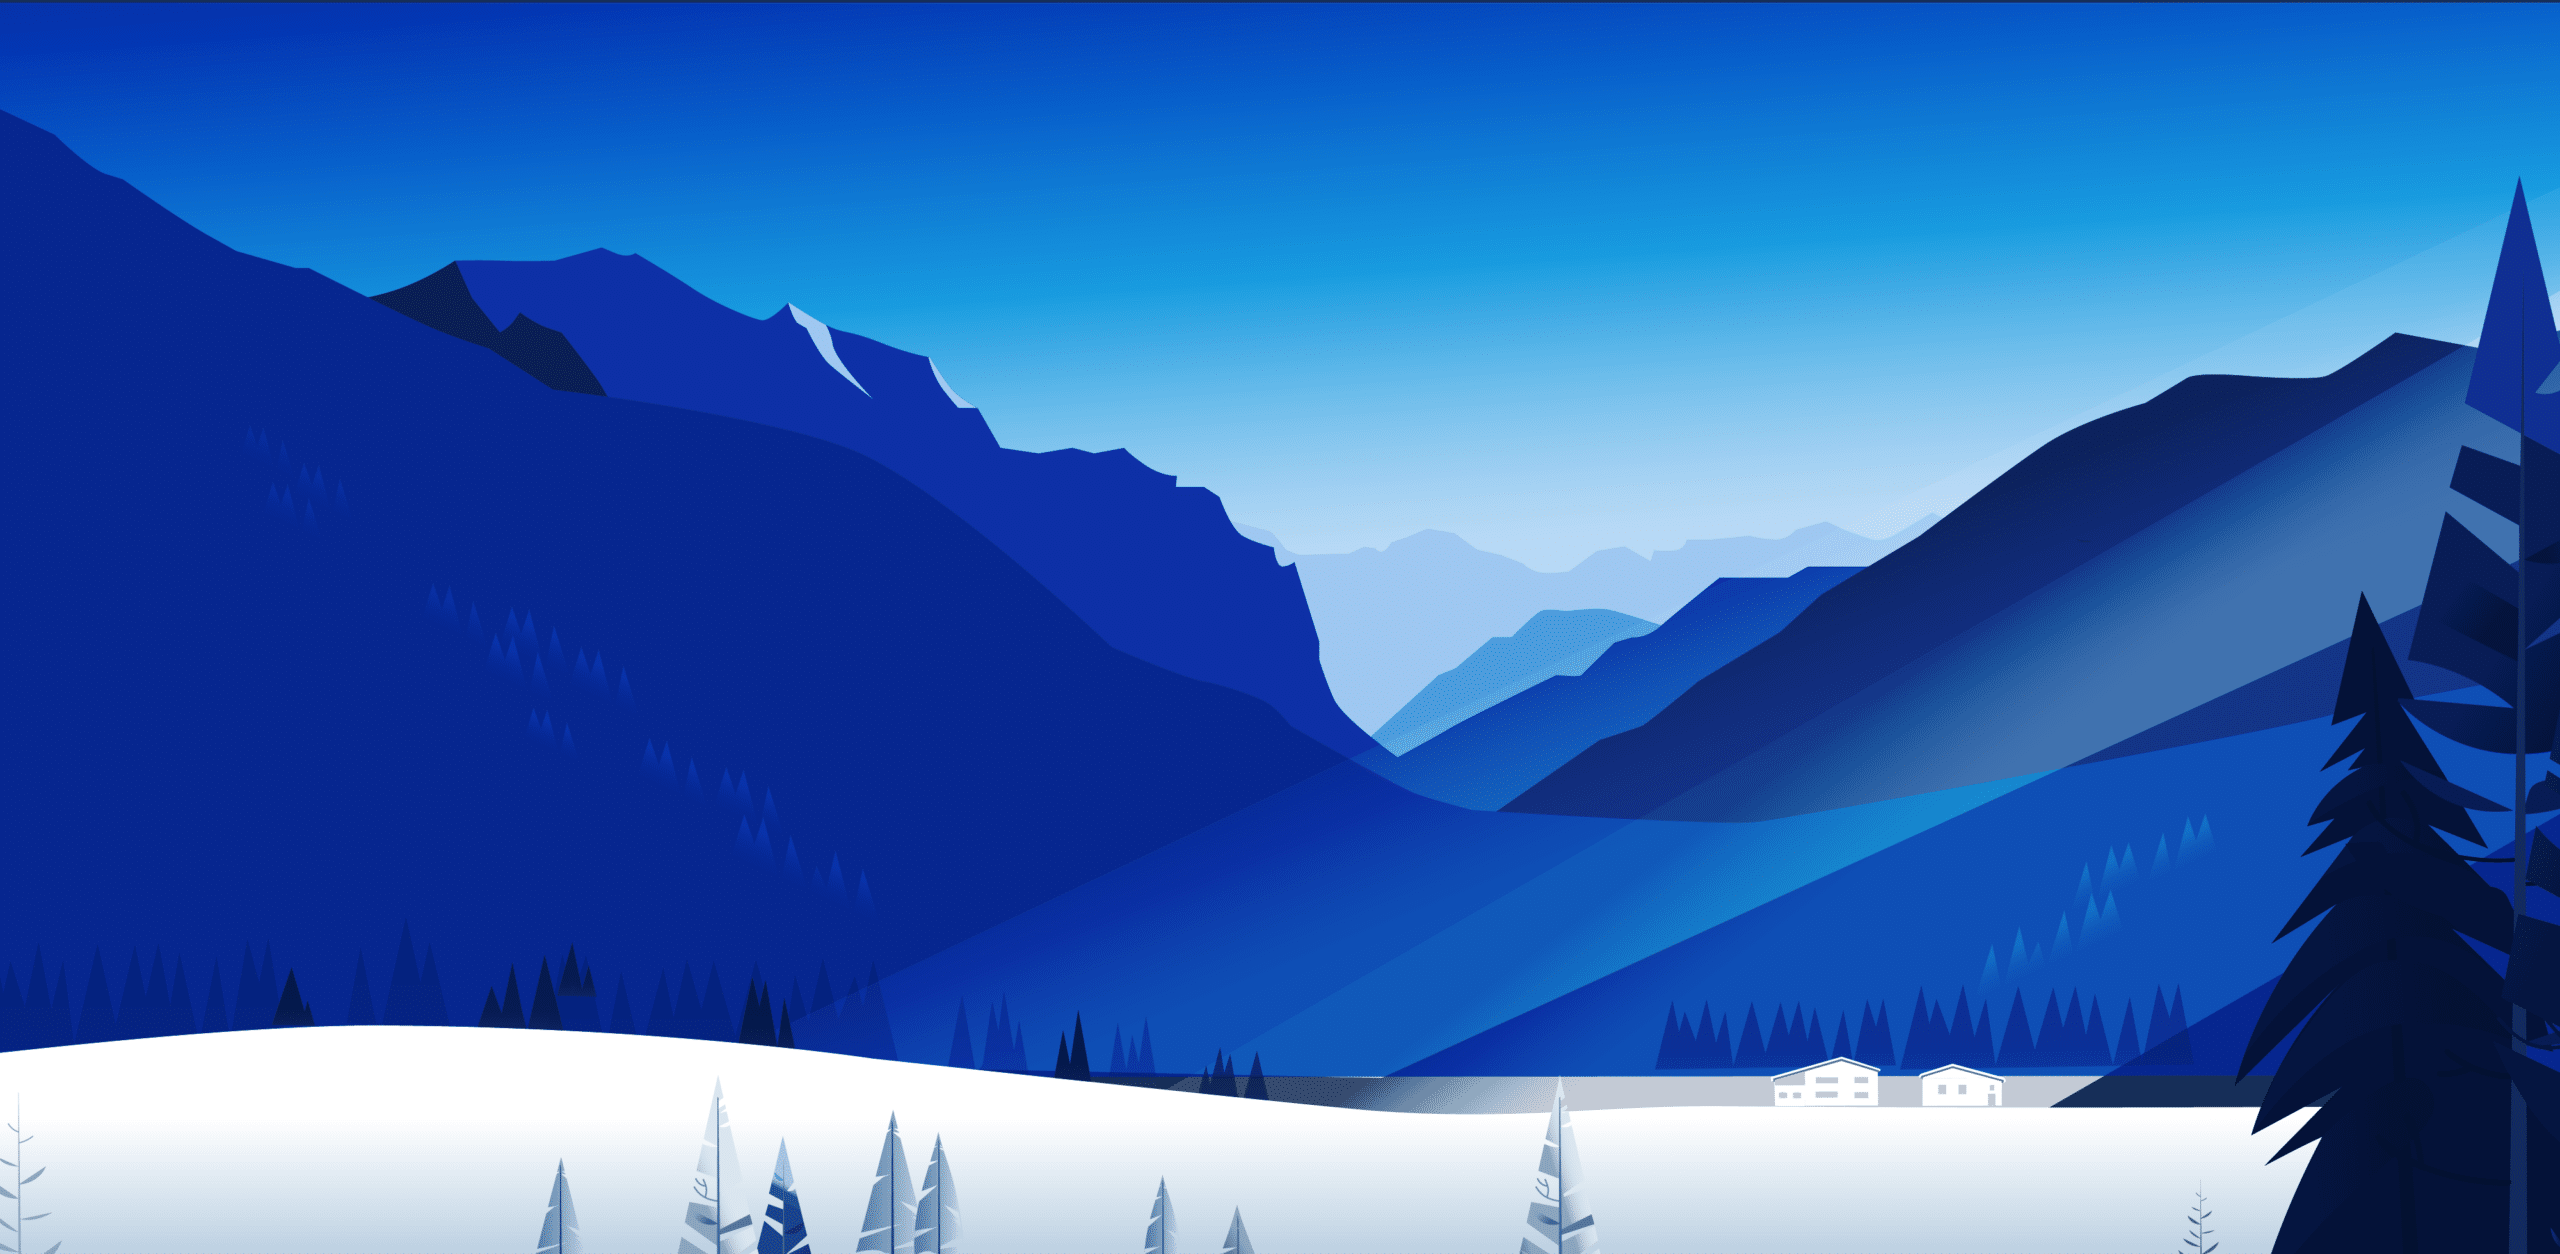 Illustration of snowy mountains and trees representing Davos 2024 event